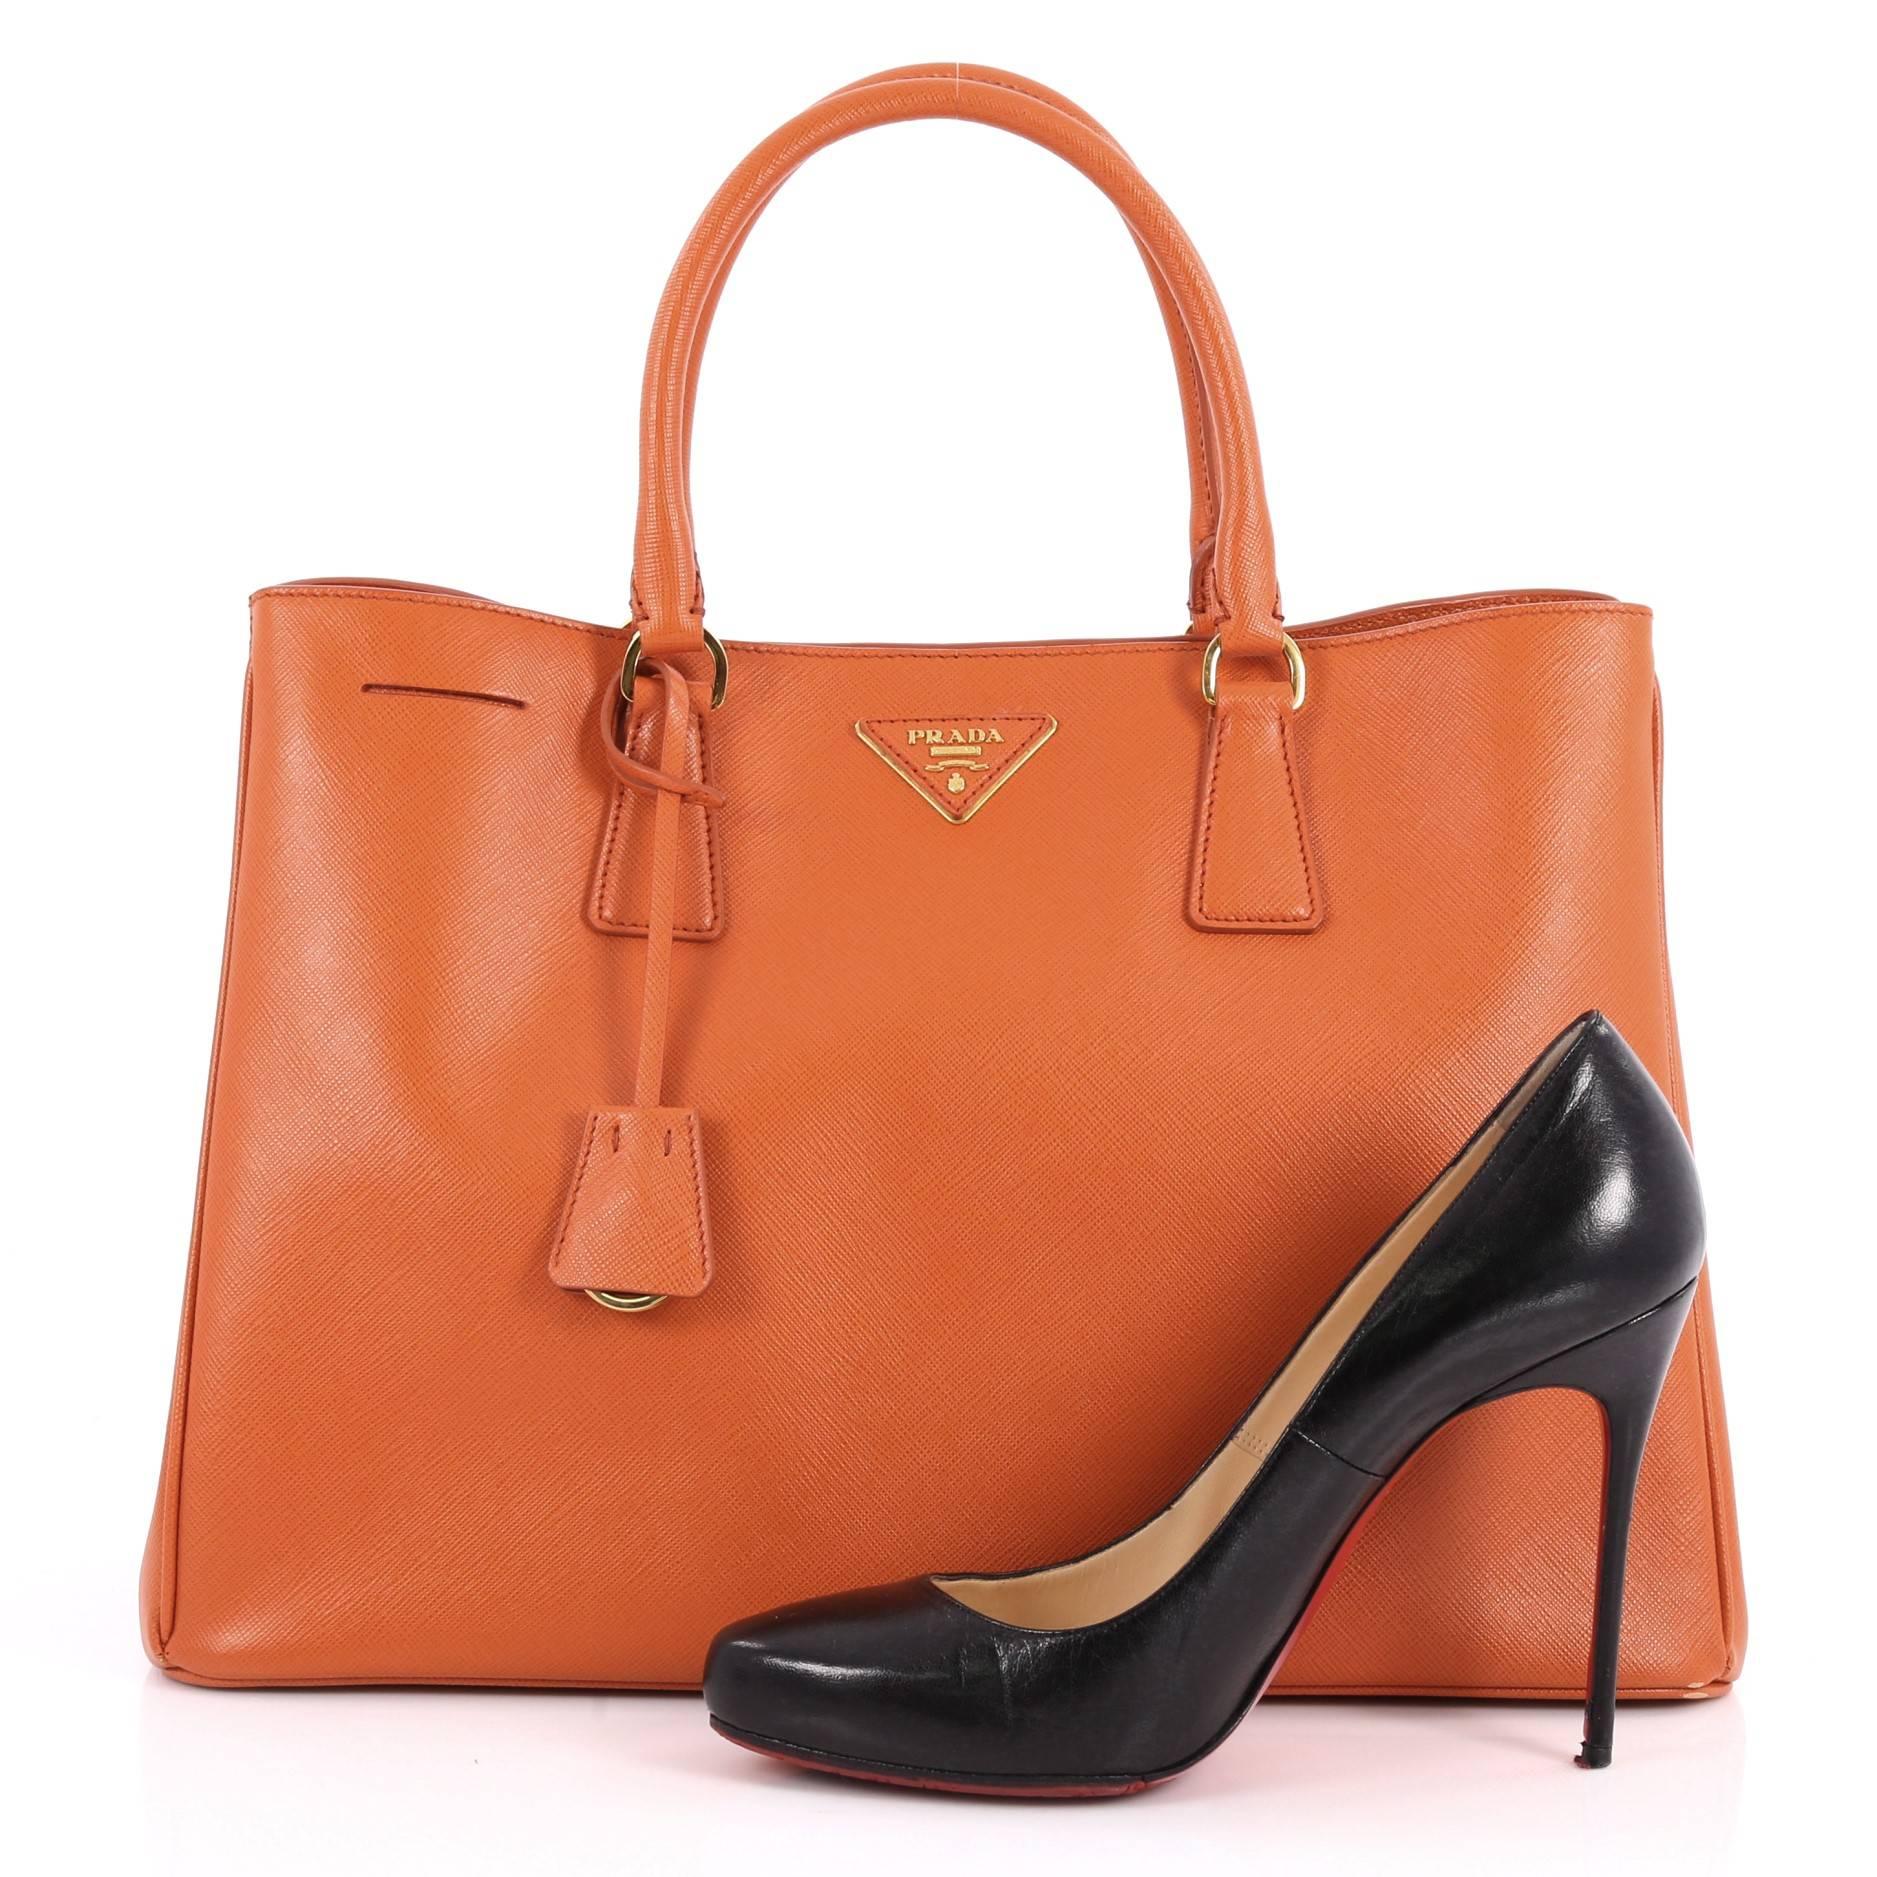 This authentic Prada Lux Open Tote Saffiano Leather Medium is elegant in its simplicity and structure. Crafted from orange saffiano leather, this sturdy and spacious tote features dual-rolled handles, gusseted side with snap buttons, iconic Prada